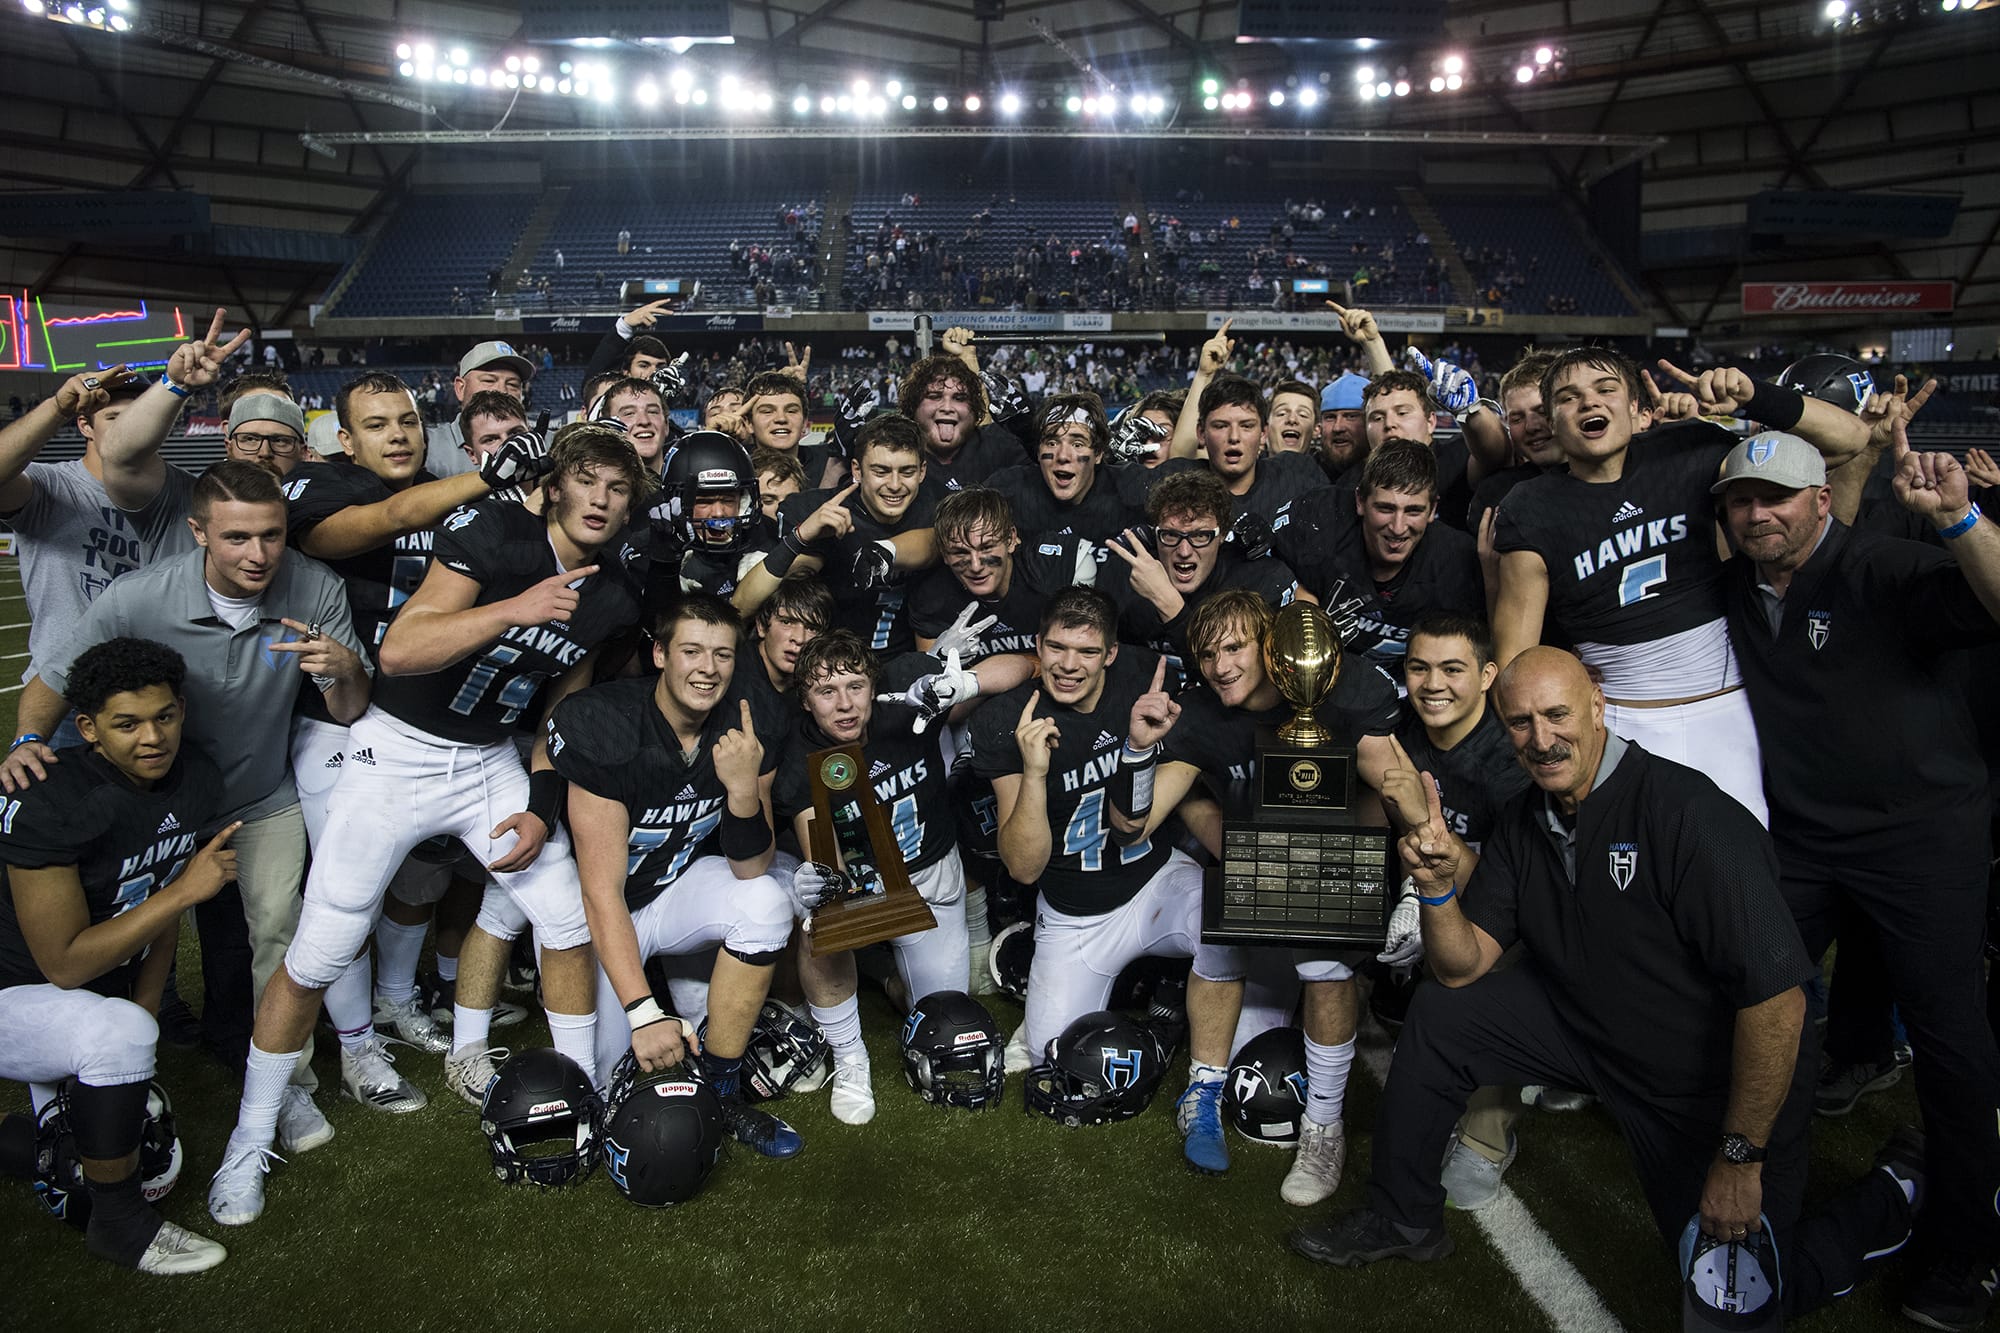 The Hawks celebrate after winning their second straight 2A state football championship game on Saturday, Dec. 1, 2018, in Tacoma, Wash. Hockinson defeated Lynden 42-37.